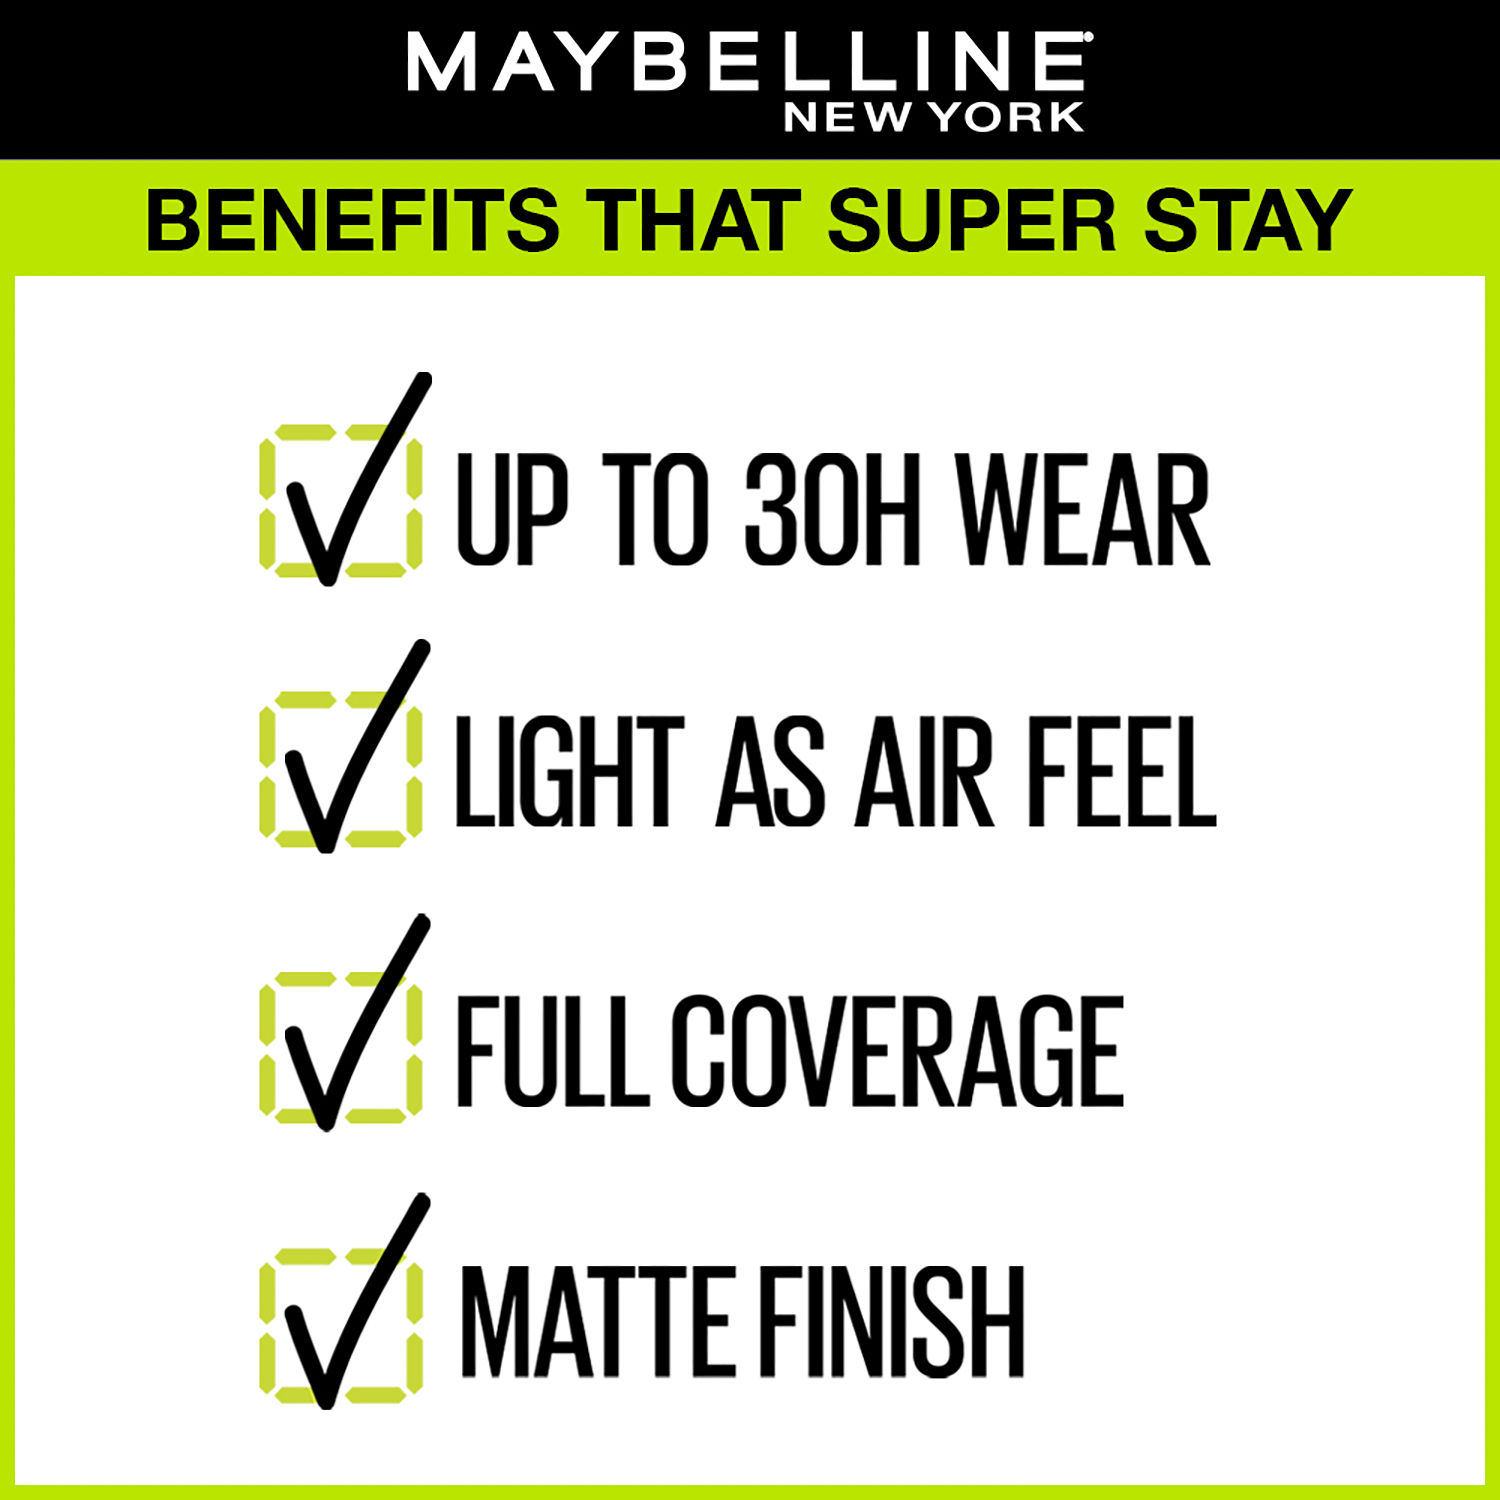 Maybelline New Coverage Finish Liquid 30 Natural 30ml Wear Super Foundation Stay York Wear, , Active Matte Transfer with Ivory, Proof, Full 112, HR